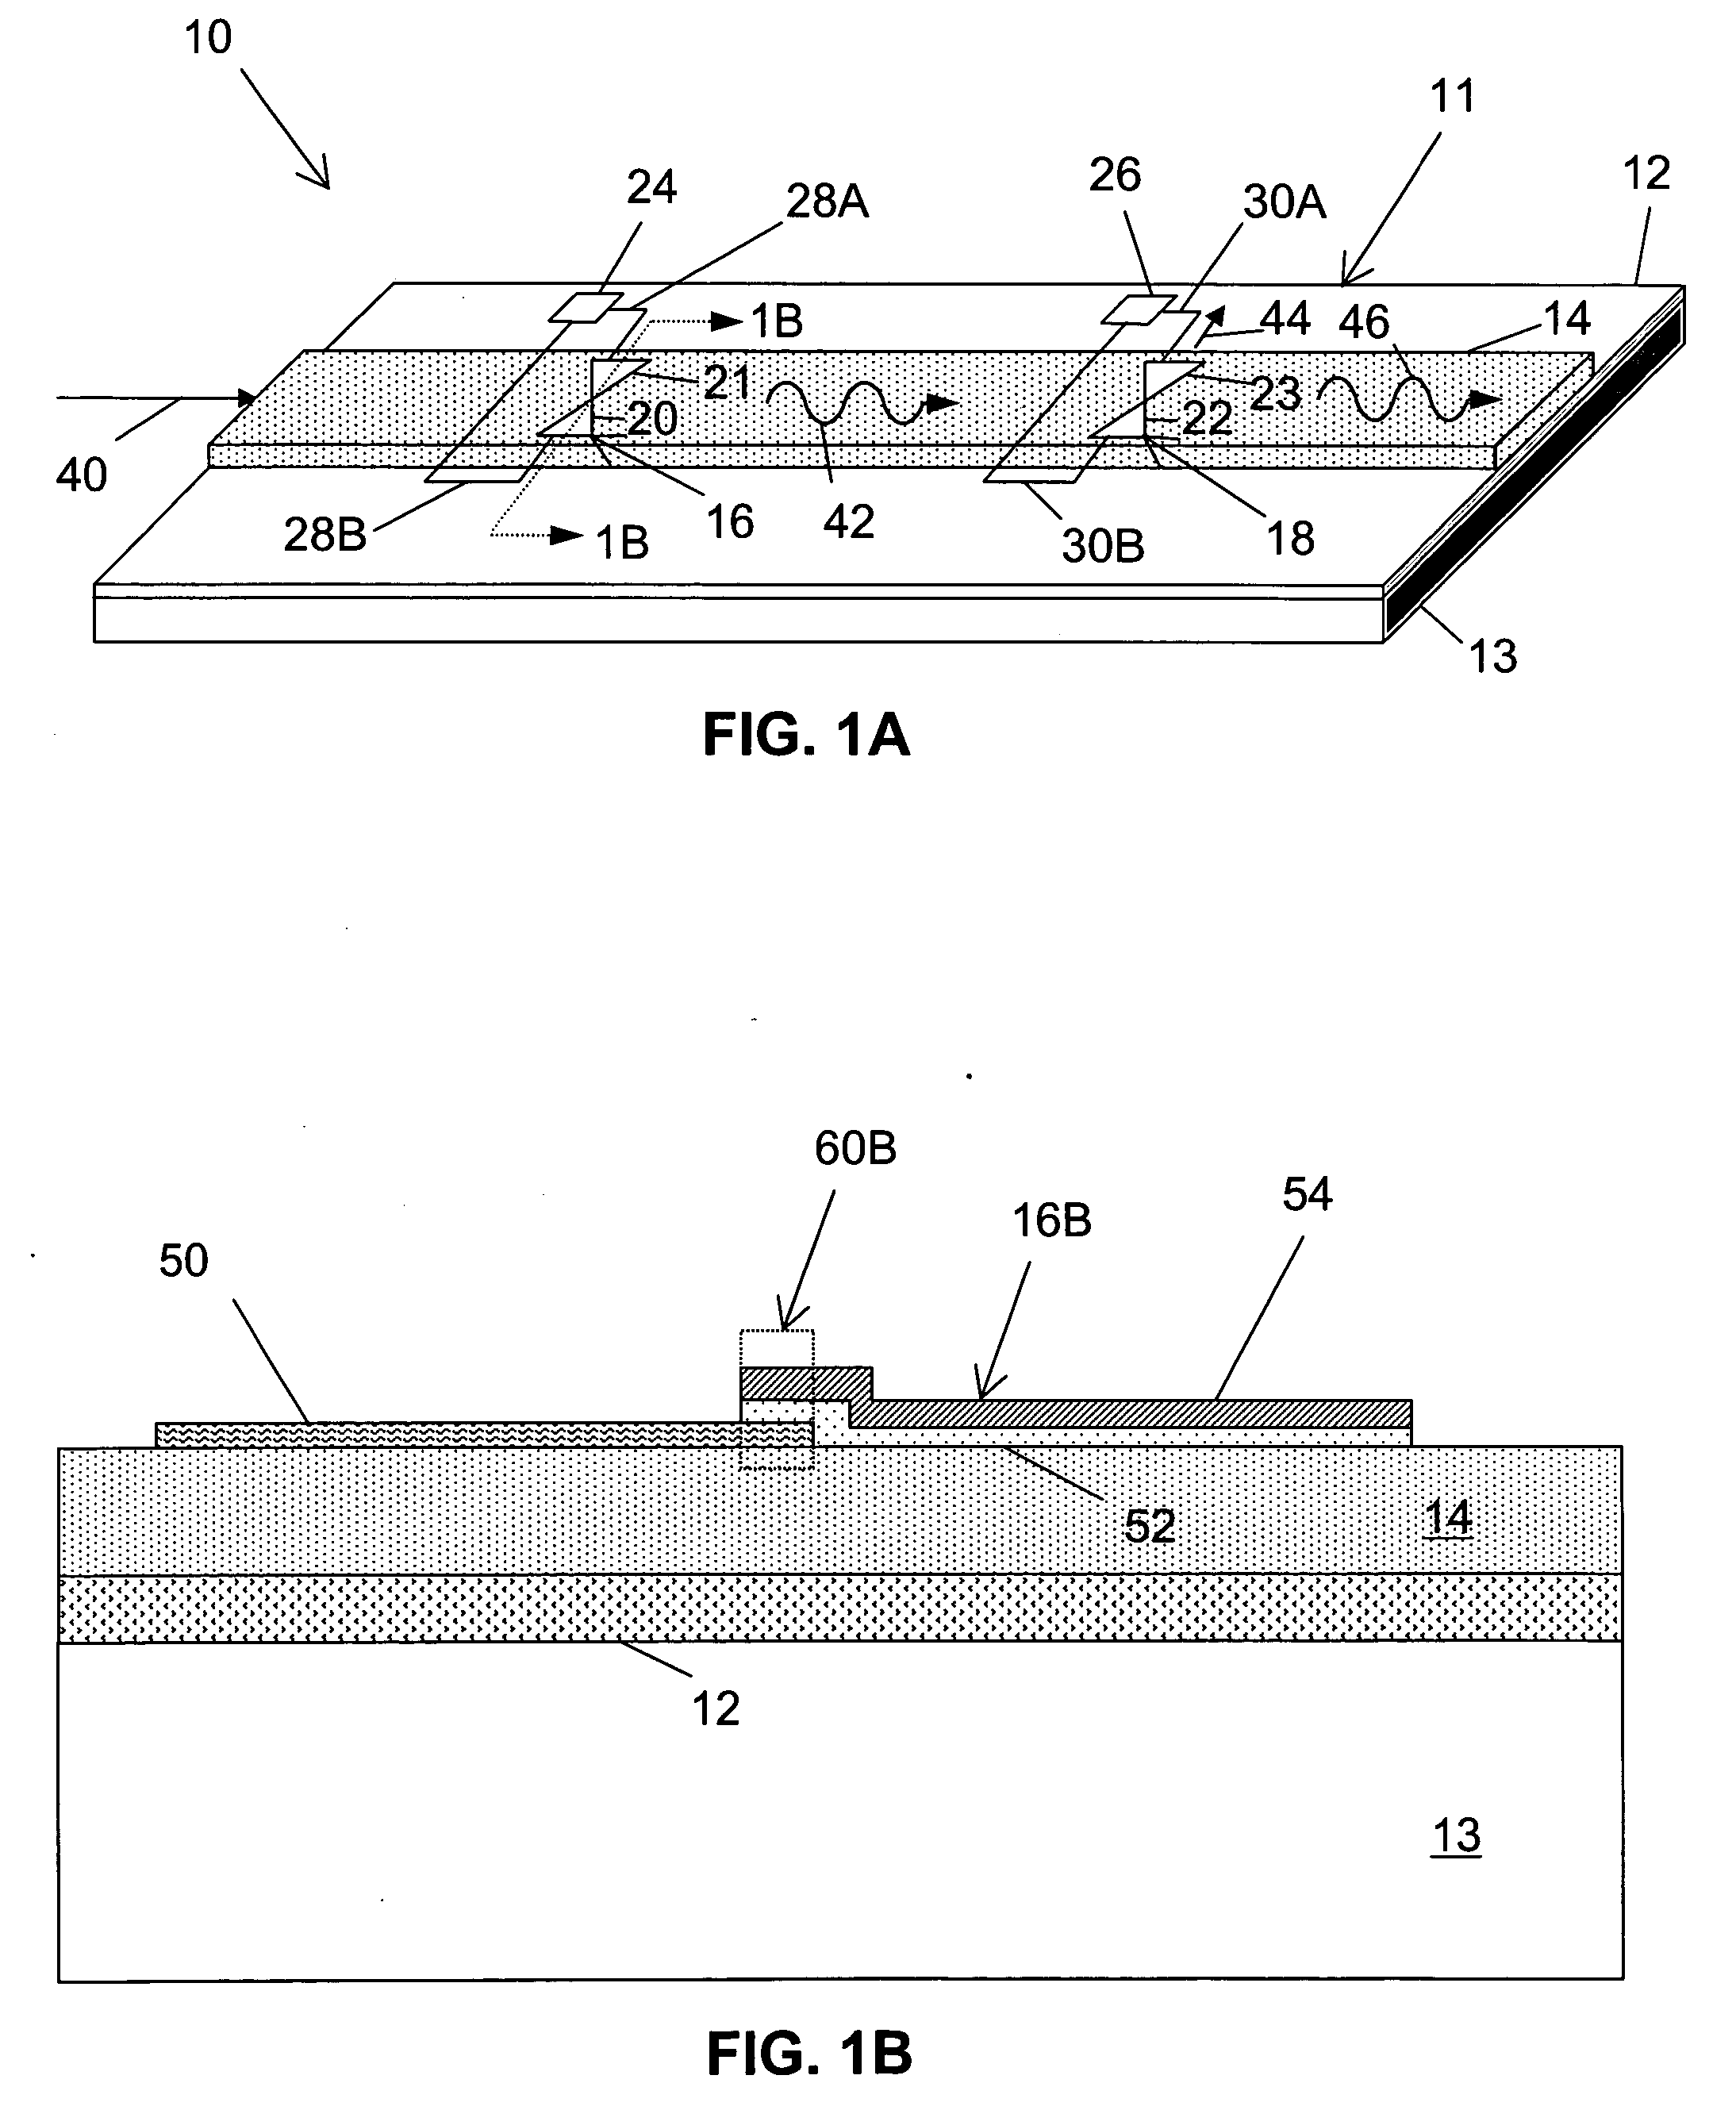 Terahertz interconnect system and applications